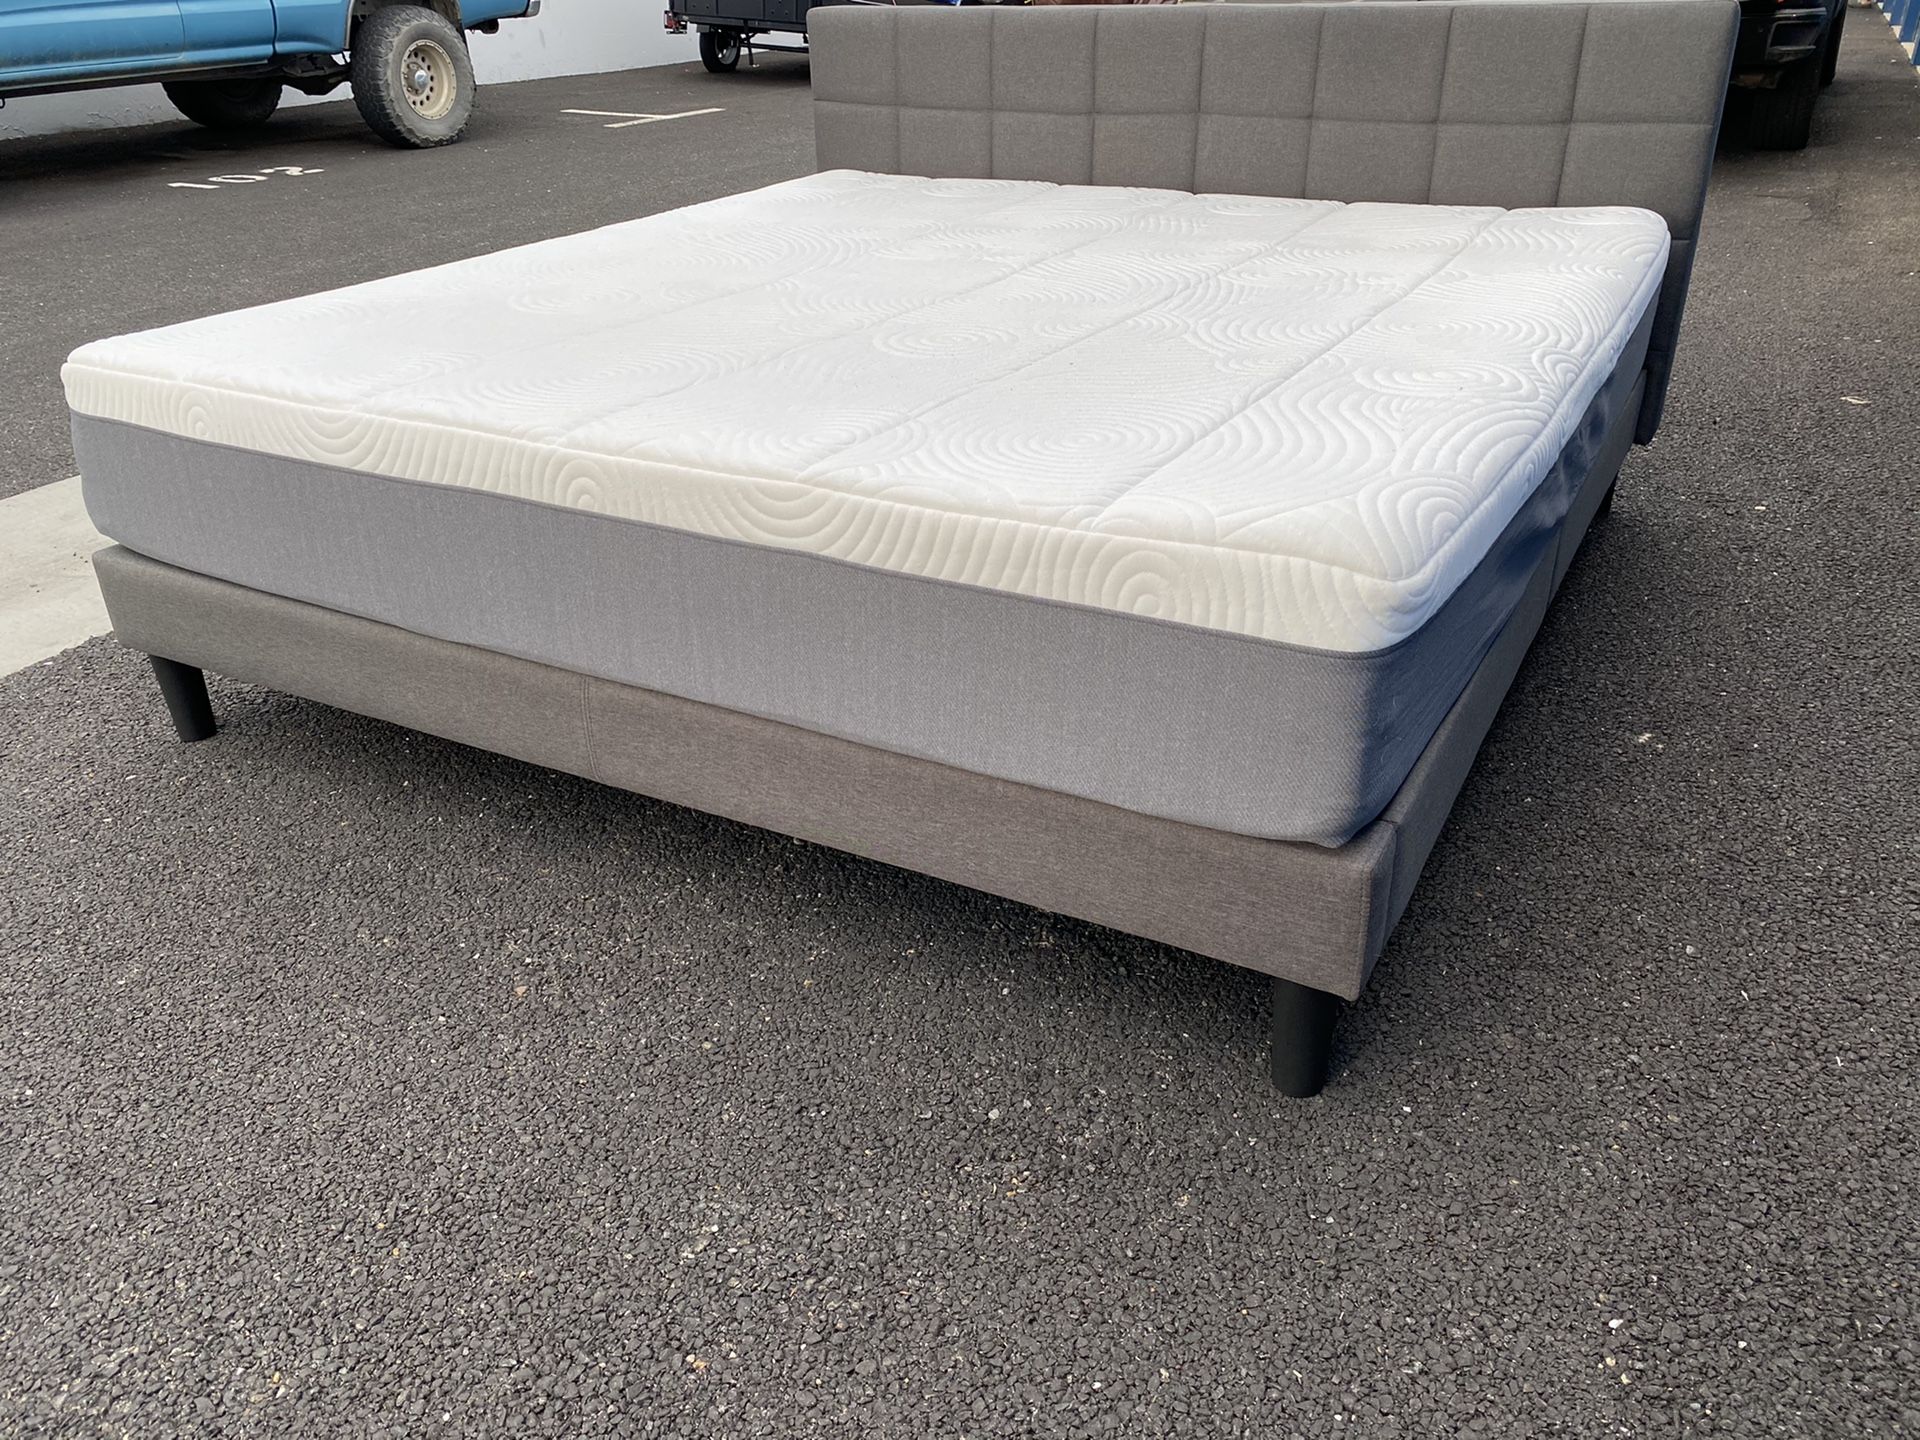 King Size Bed ! Blackstone king size mattress and platform frame ! King Bed ! Memory foam mattress ! Free delivery